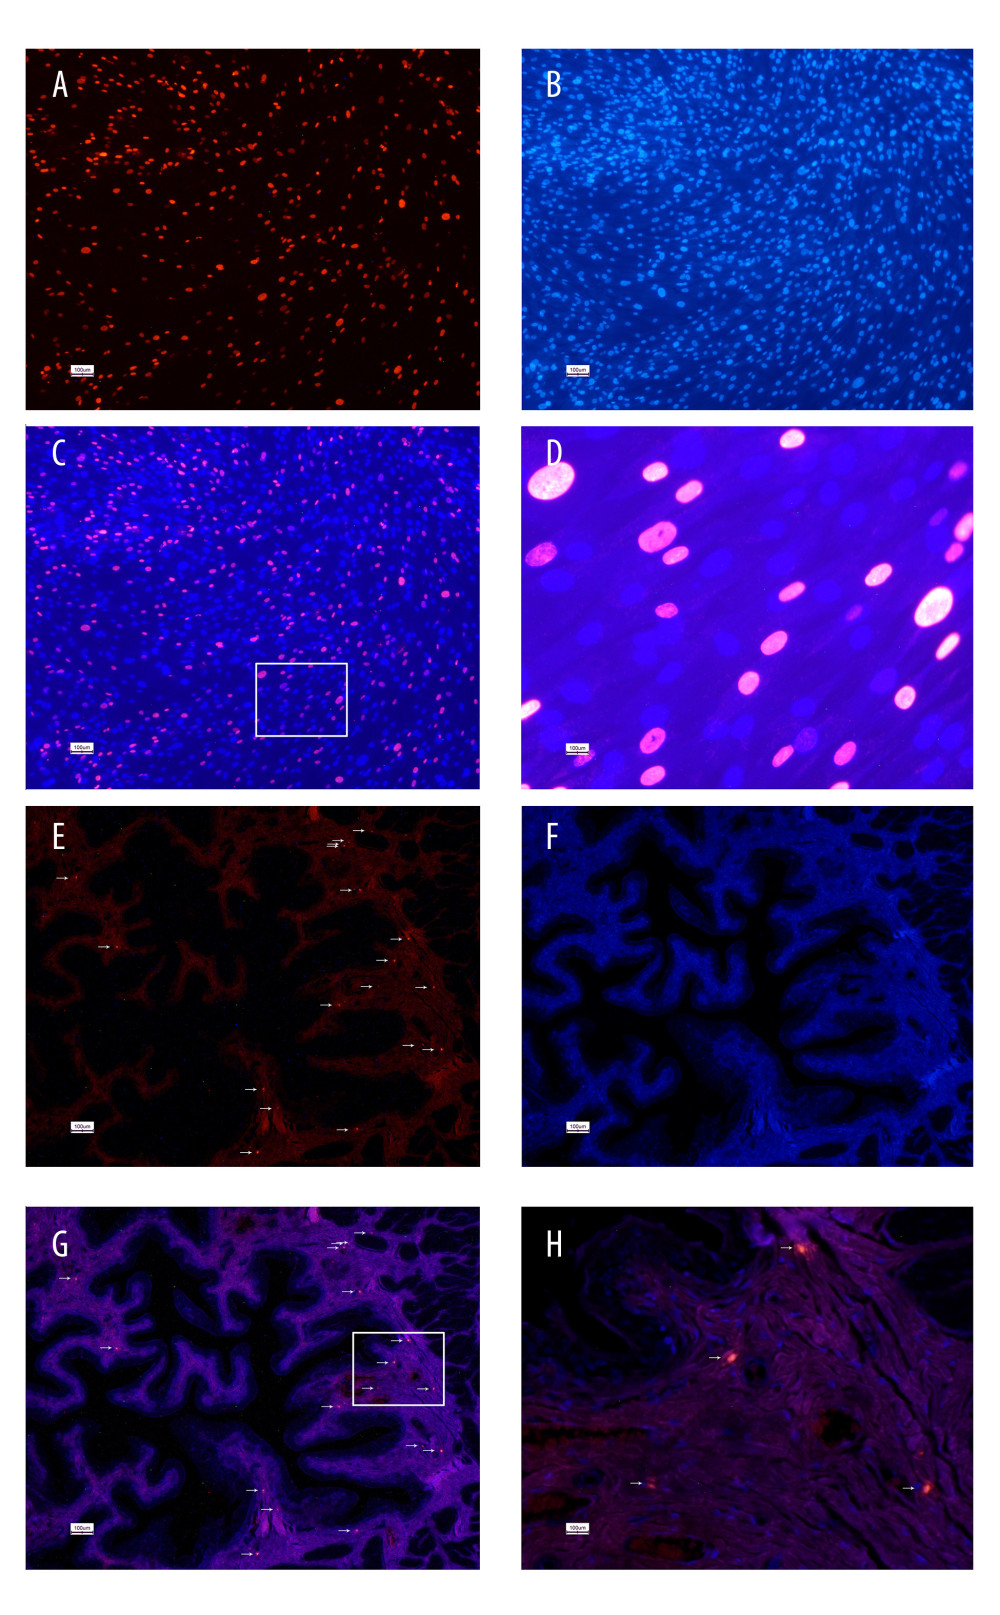 5-Ethynyl-2-deoxyuridine (EdU) labeling of UC-MSCs in vitro and tracking EdU-labeled human umbilical cord-derived mesenchymal stem cells (UC-MSCs) in vivo. UC-MSCs labeled by EdU and stained with Apollo 567 (A, red fluorescence) and Hoechst 33342 (B, blue fluorescence). EdU-labeled UC-MSCs stained with Apollo 567 in harvested rat bladders (E, red fluorescence), Hoechst 33342 (F, blue fluorescence). The boxed areas in the ×40 magnified images in (C) and (G) were amplified ×200 in the corresponding (D) and (H), respectively. White arrows point to nuclei that are presented in the graphs.